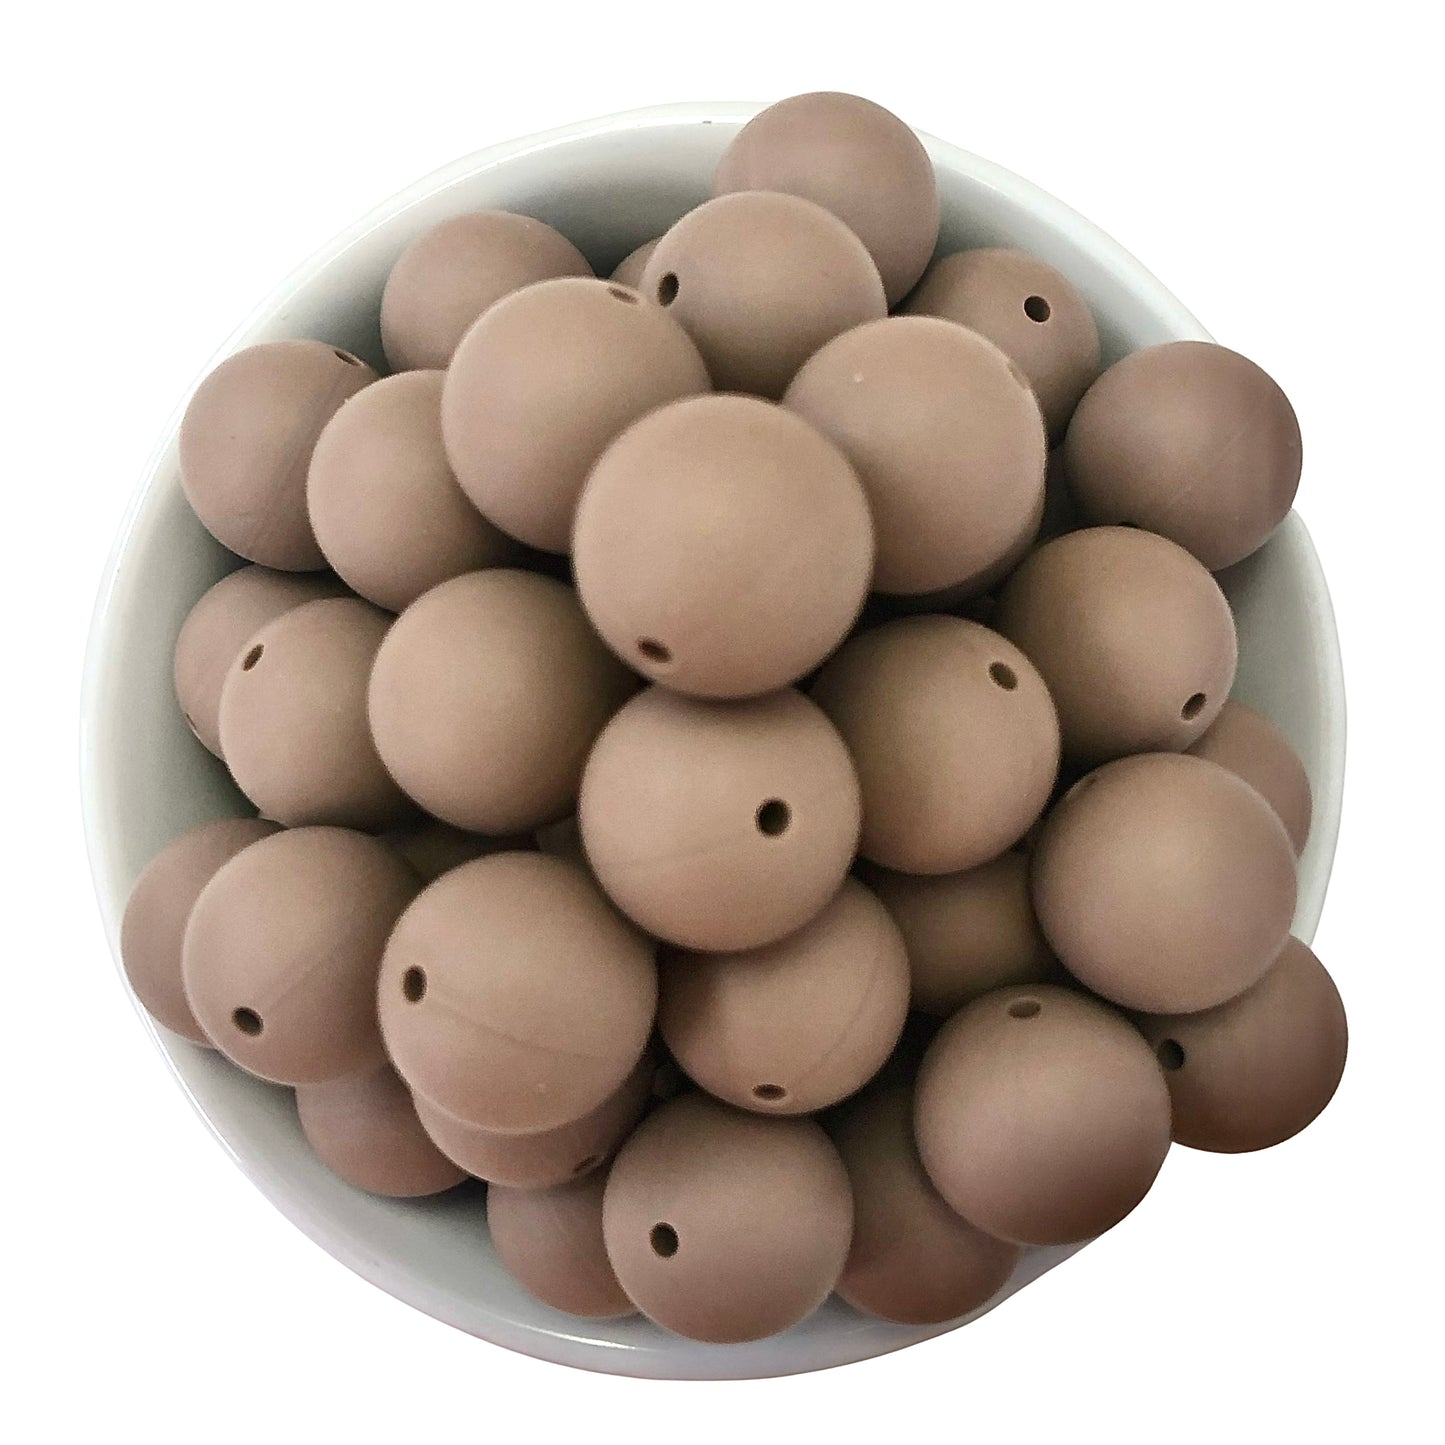 Chocolate Latte 19mm Silicone Beads - 5 pk.